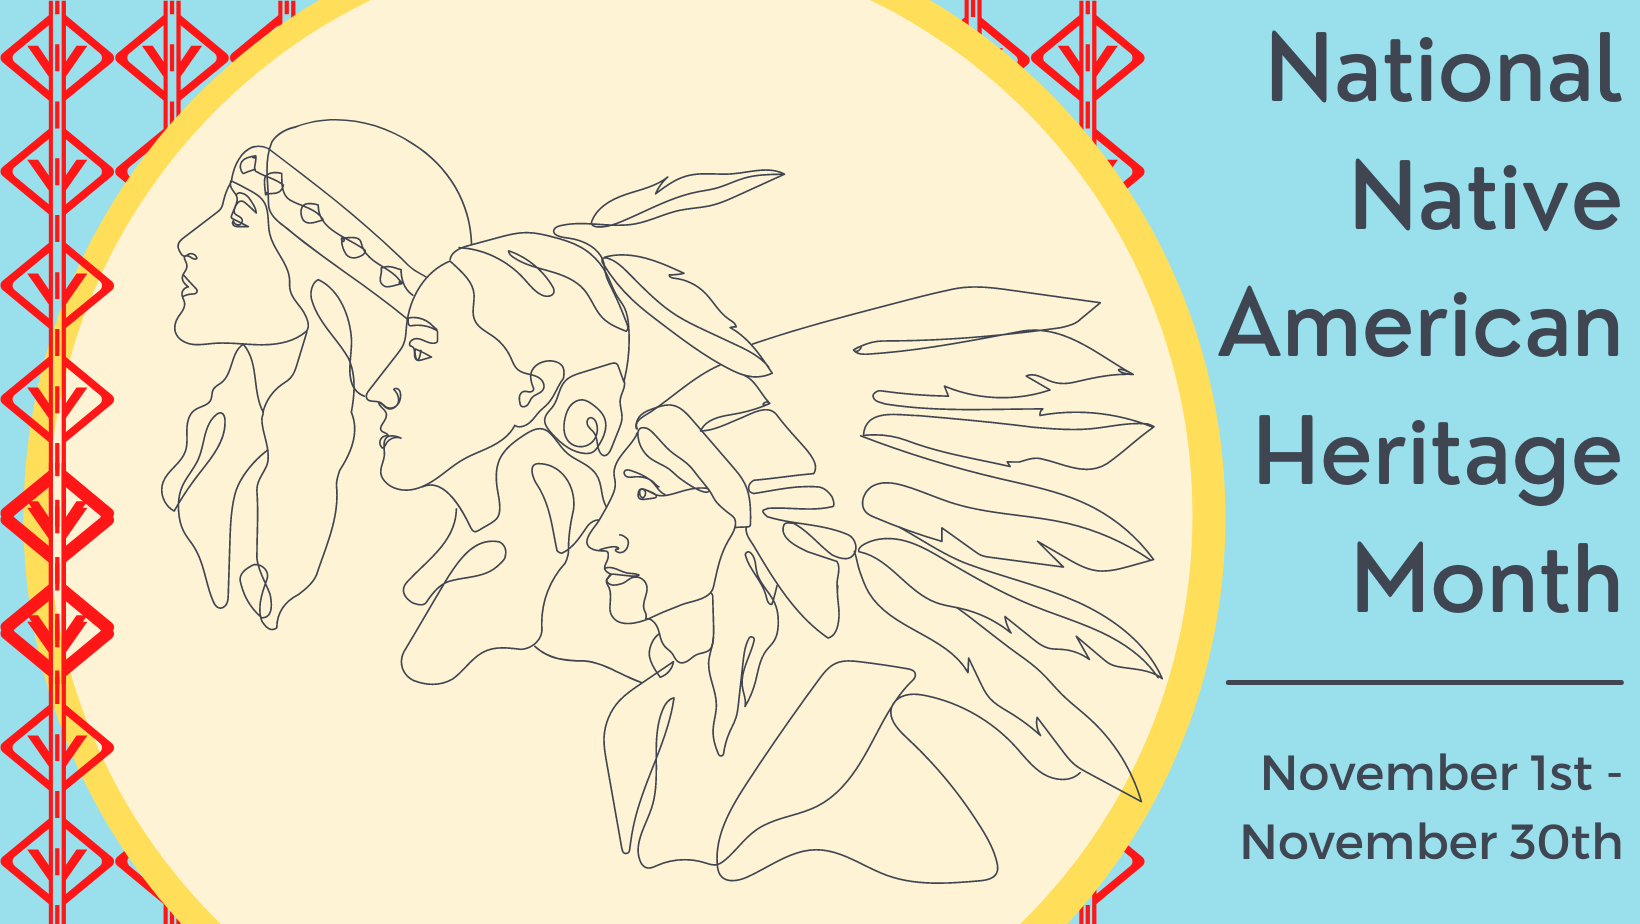 Native American Heritage Month: Everything You Need to Know